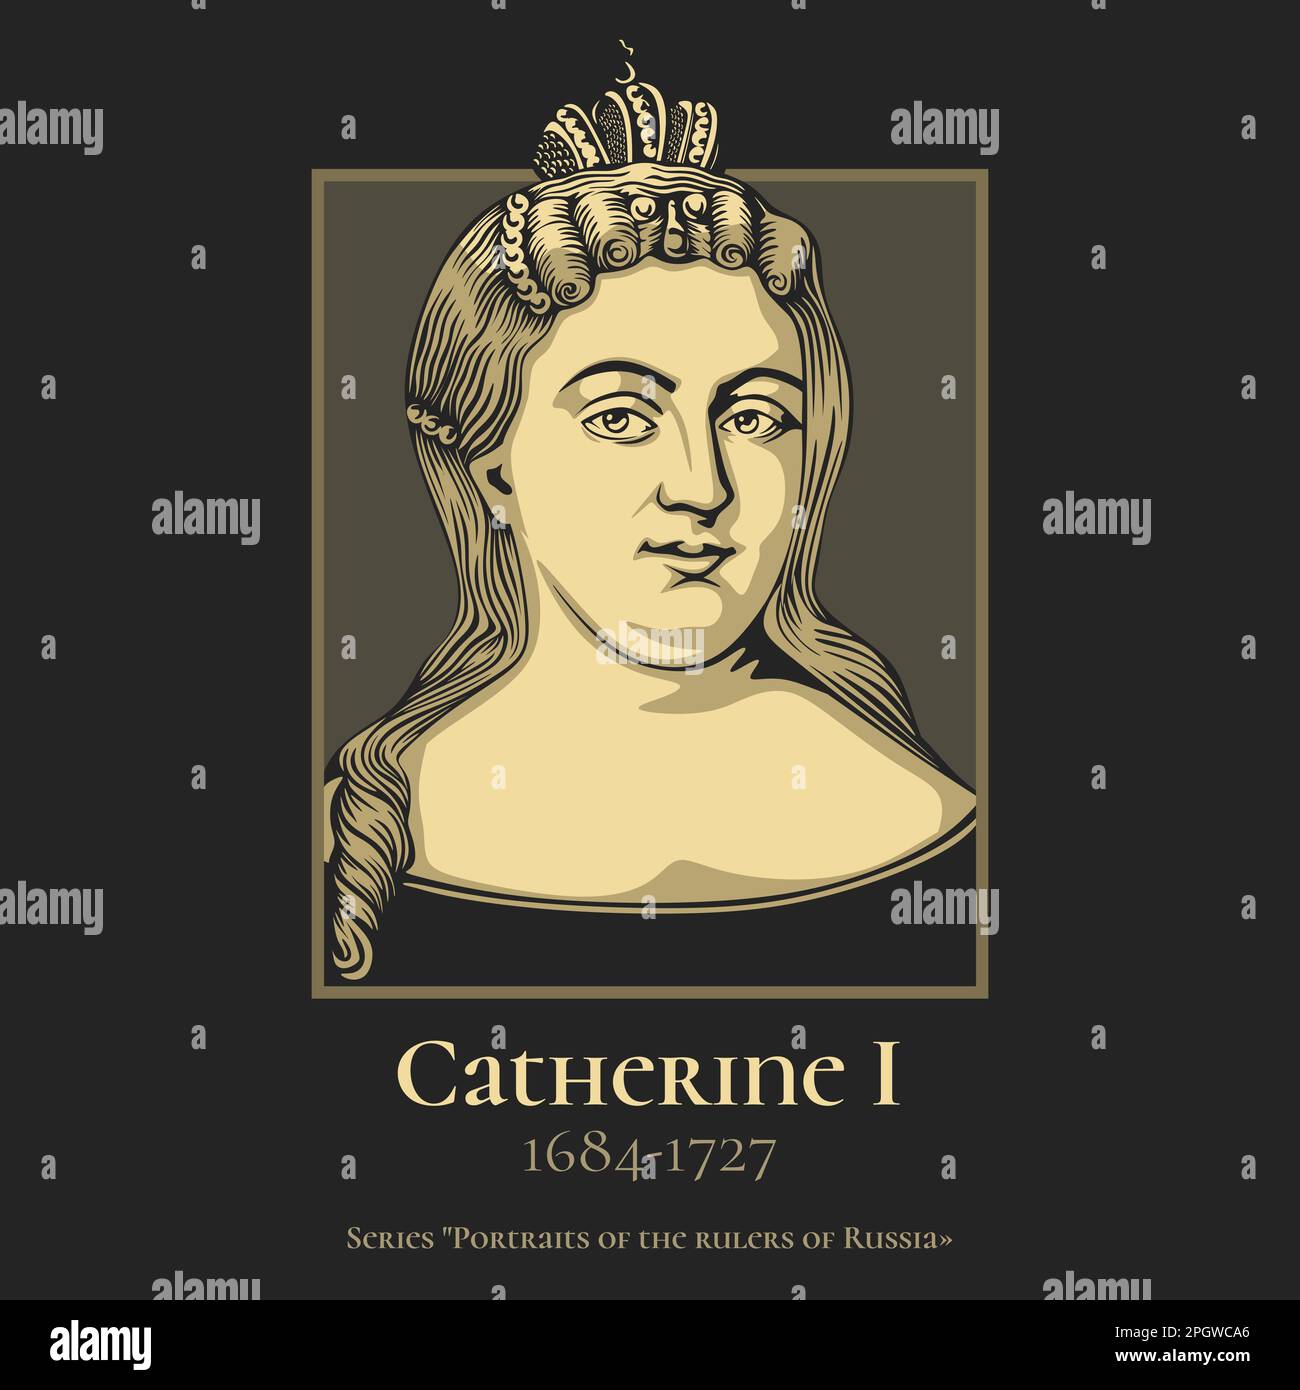 Catherine I (1684-1727) was the second wife and empress consort of Peter the Great, and Empress Regnant of Russia from 1725 until her death in 1727. Stock Vector